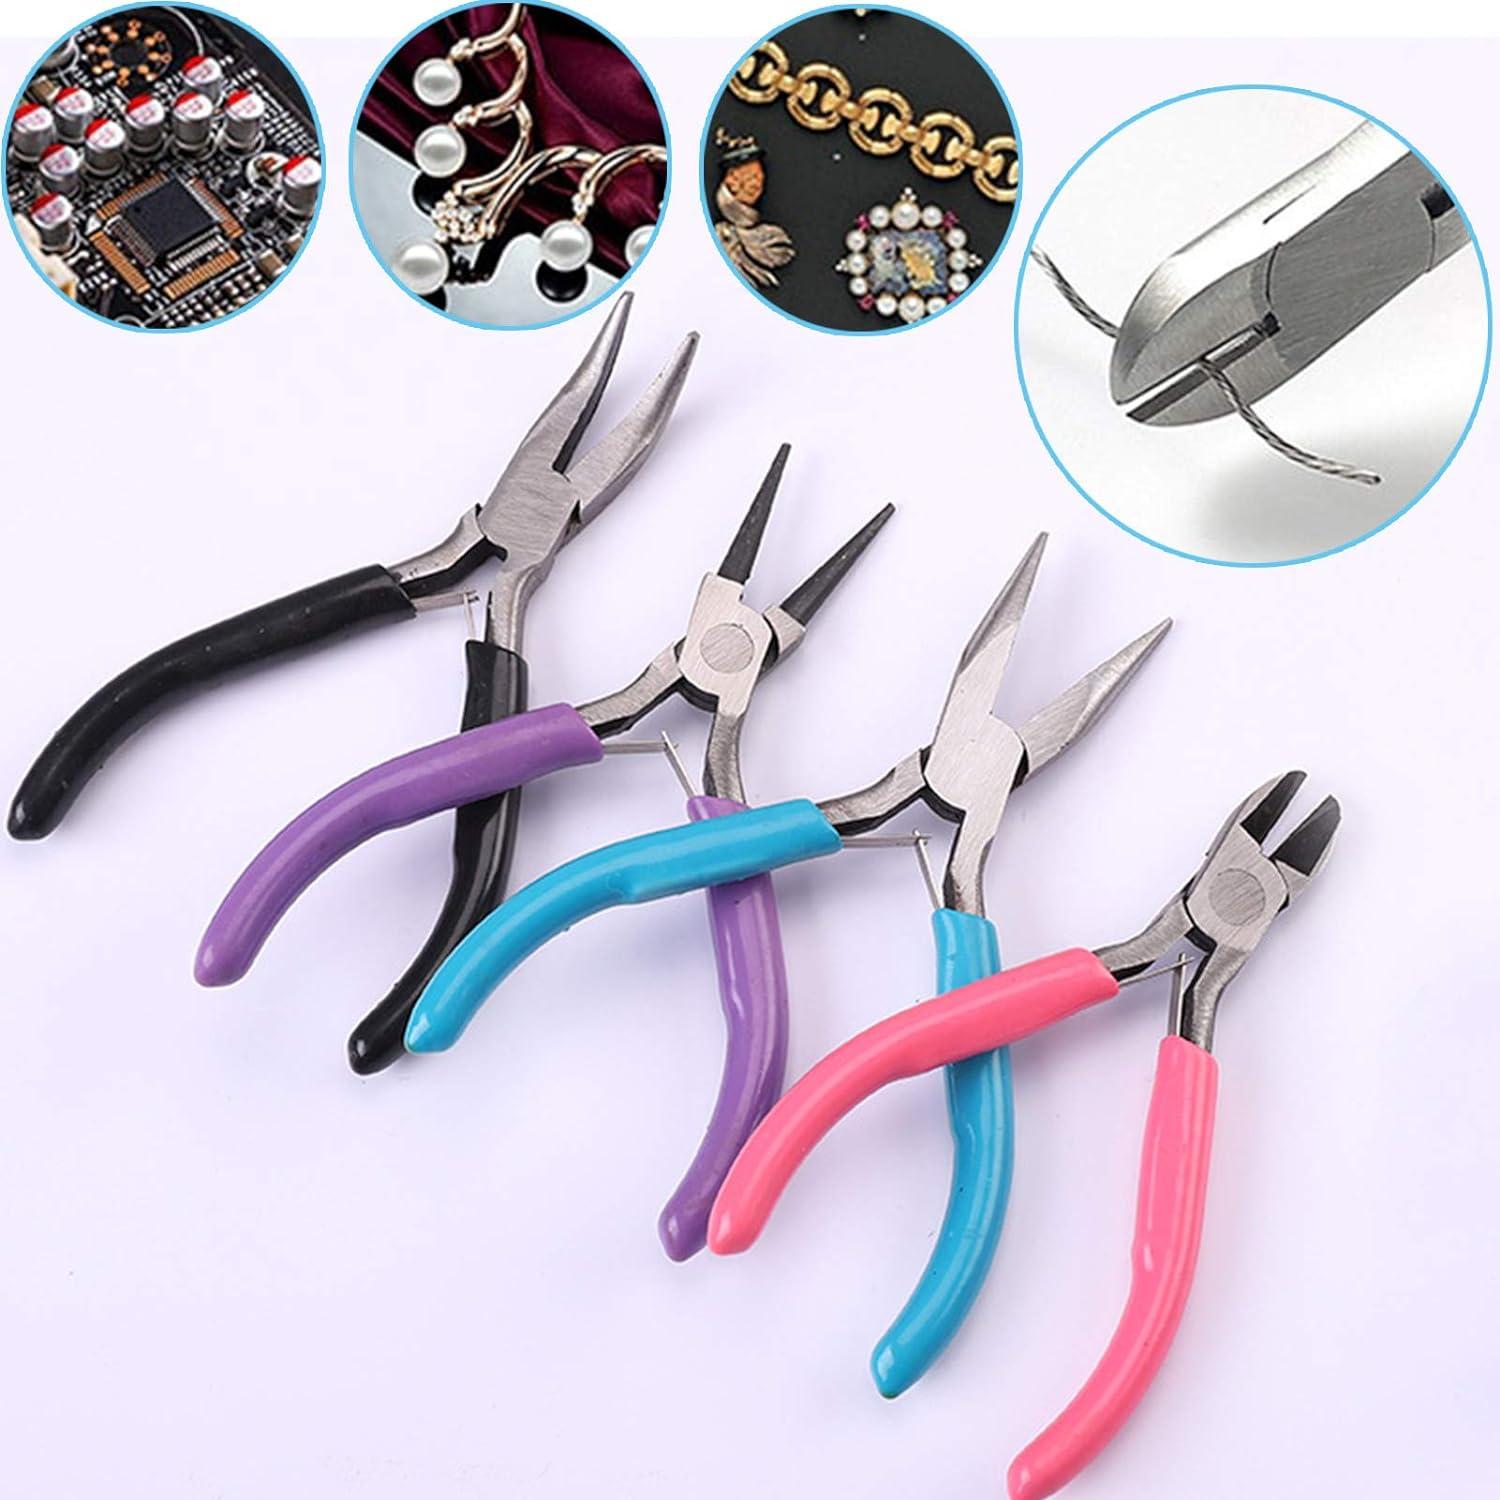  4 Long Needle Nose Pliers and 4 Wire Flush Cutters Bundle, Hand  Tool Set for Jewelry Making Wire Cutting Beading Wrapping : Arts, Crafts &  Sewing